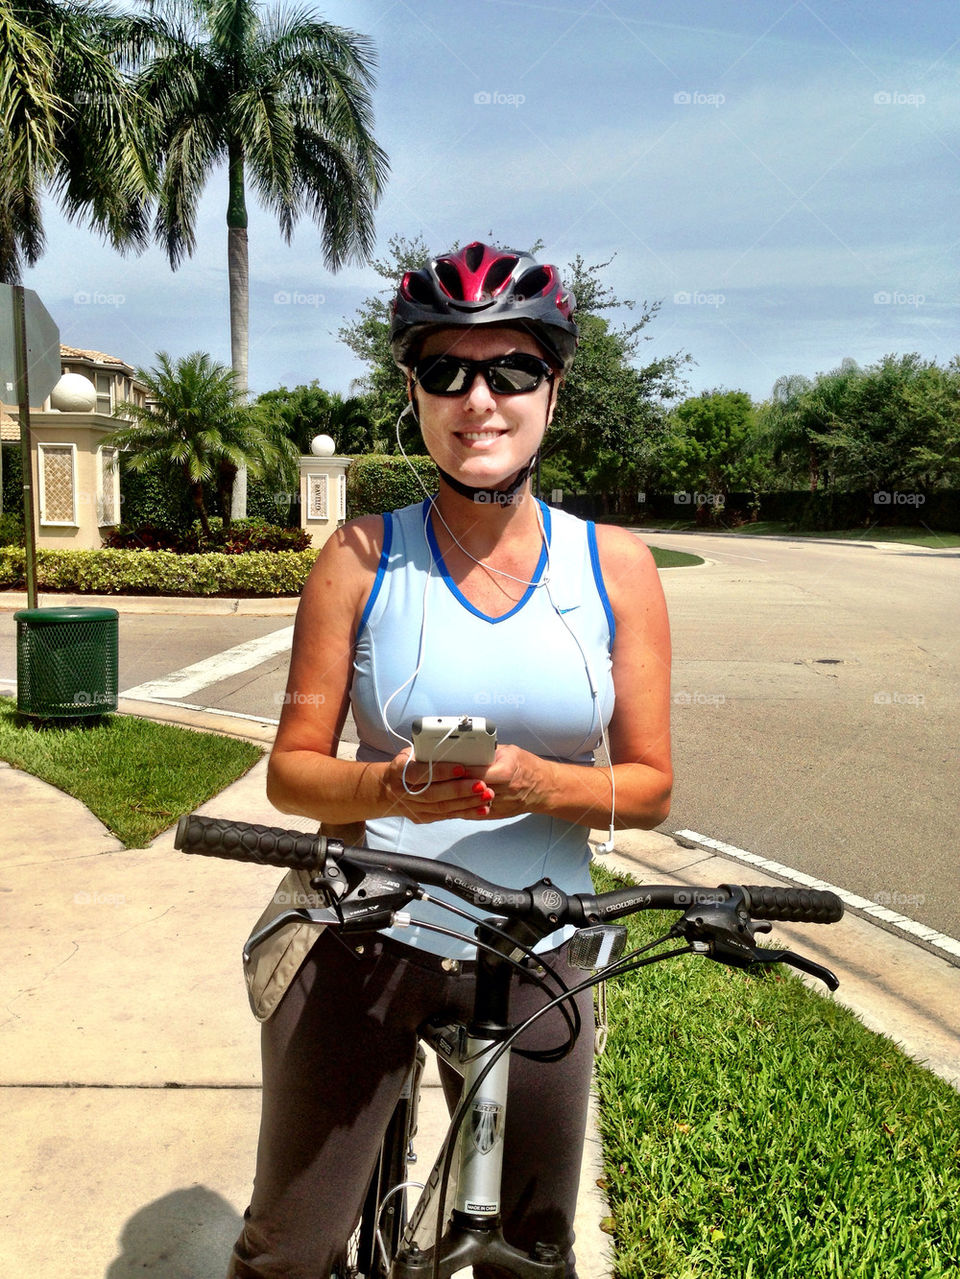 Woman on bicycle with helmet and headphones smiling